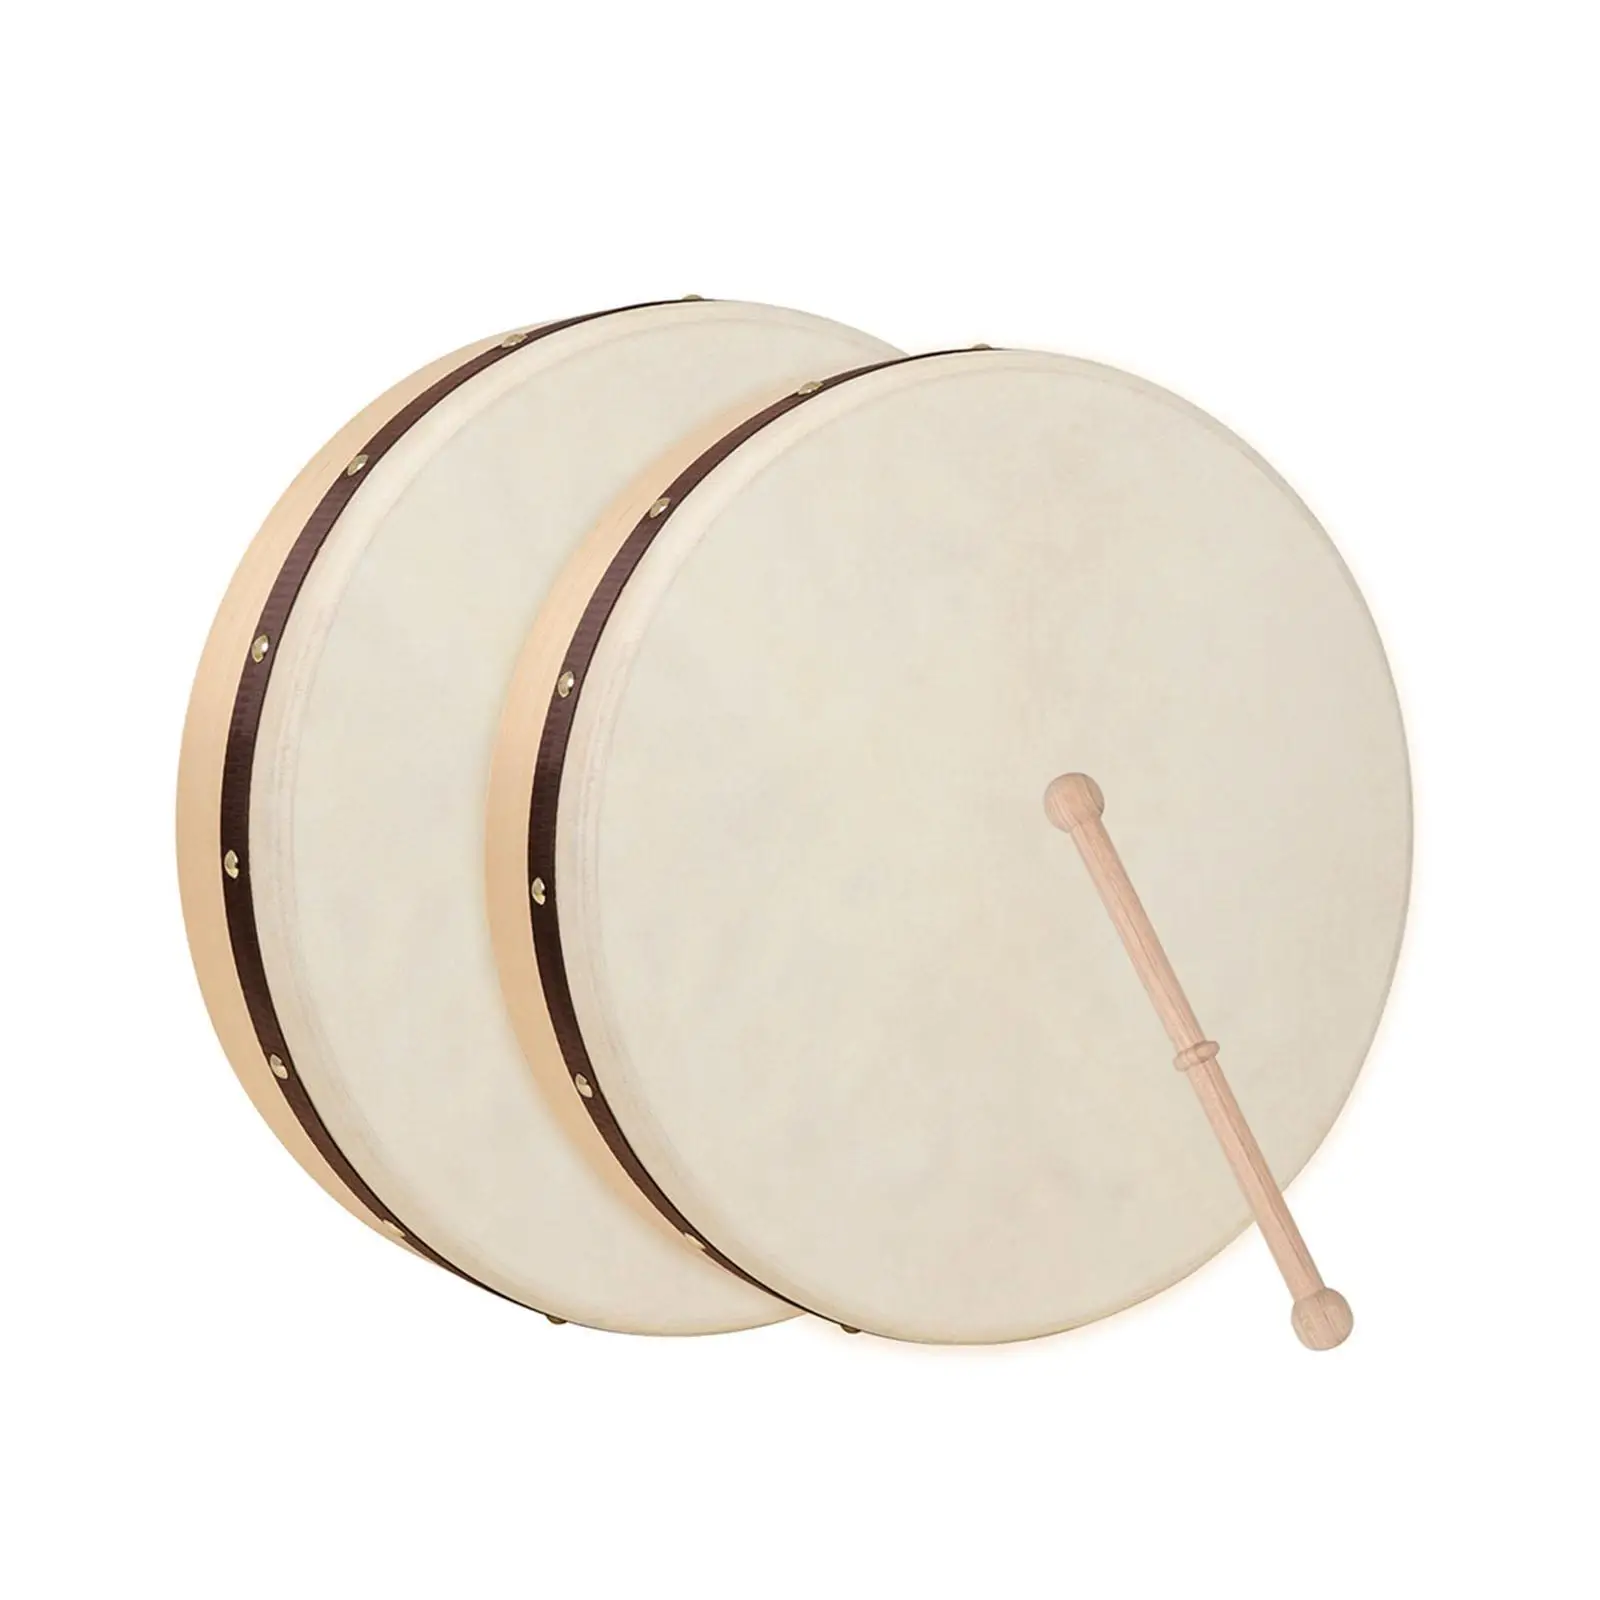 Handheld Pre-Tuned Hand Drum with Beater Percussion for Kids